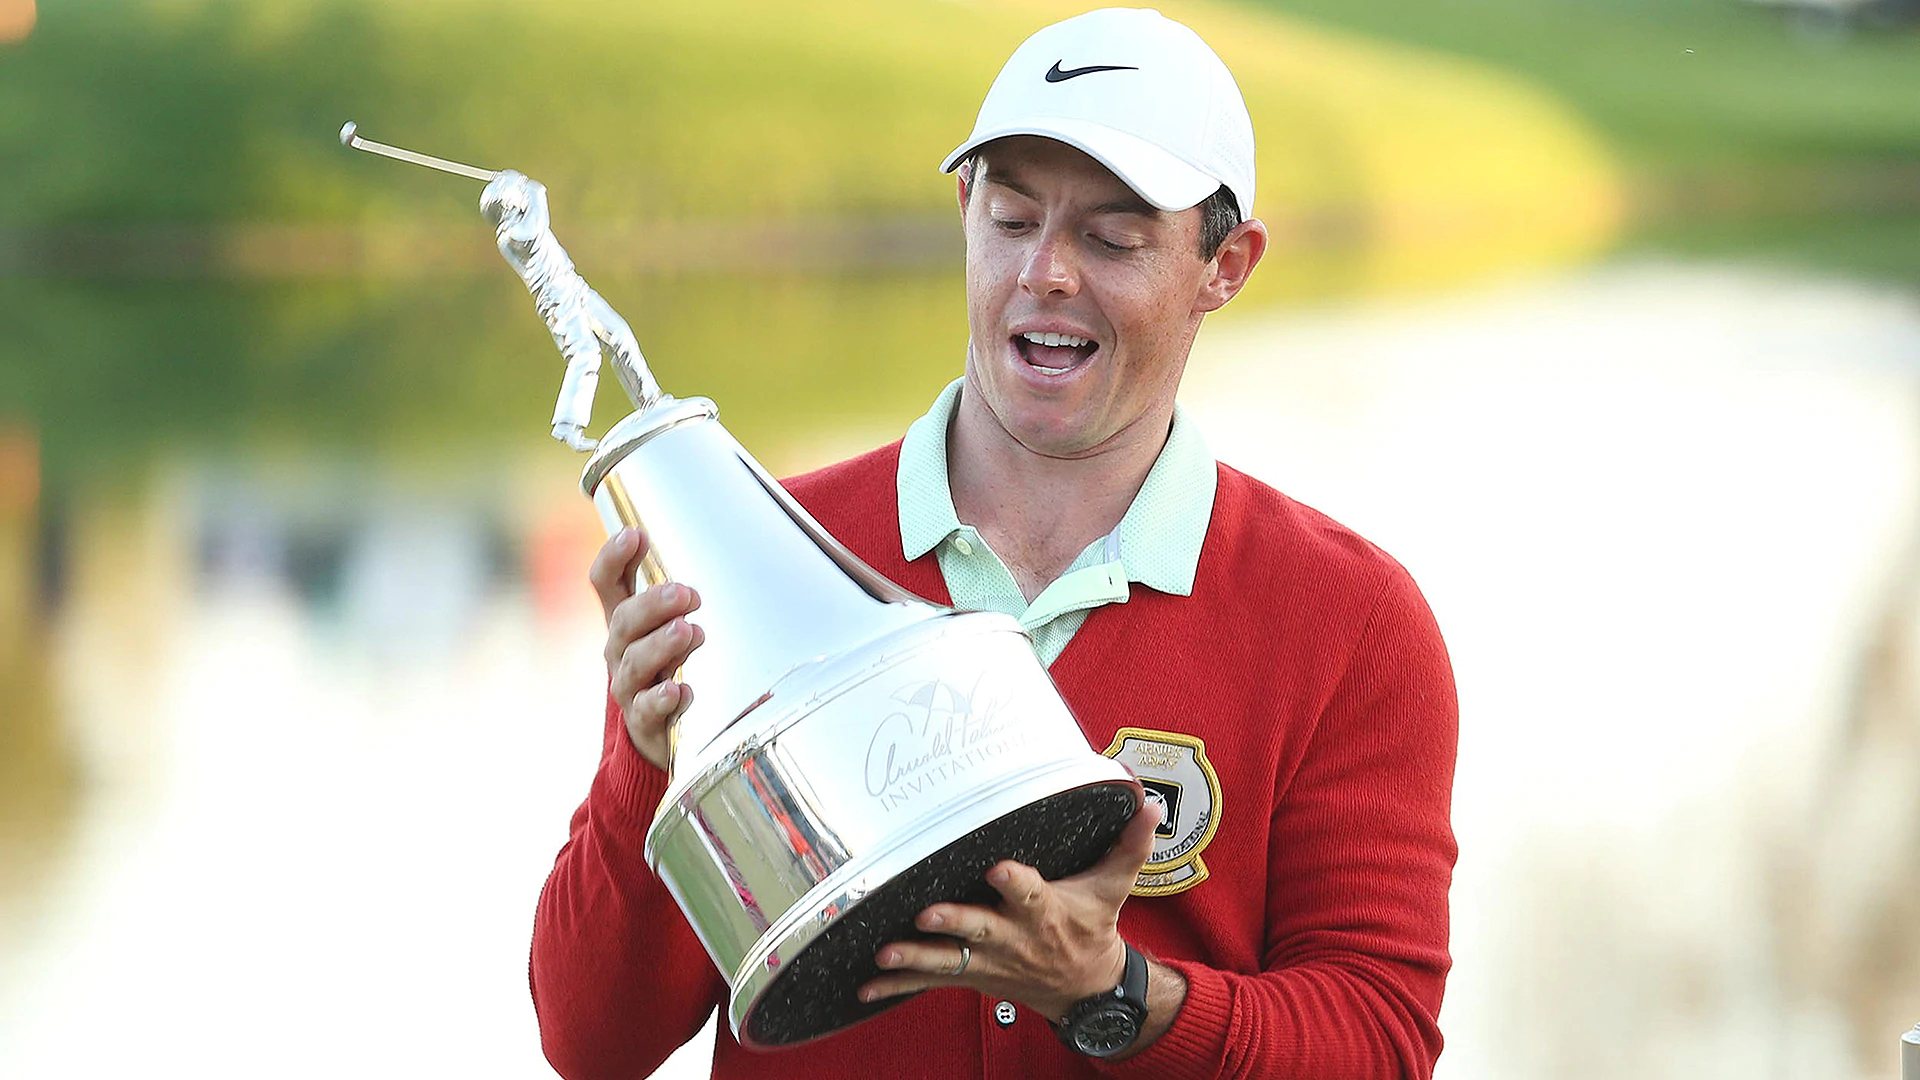 Rory inside OWGR top 10; Tiger near top 100